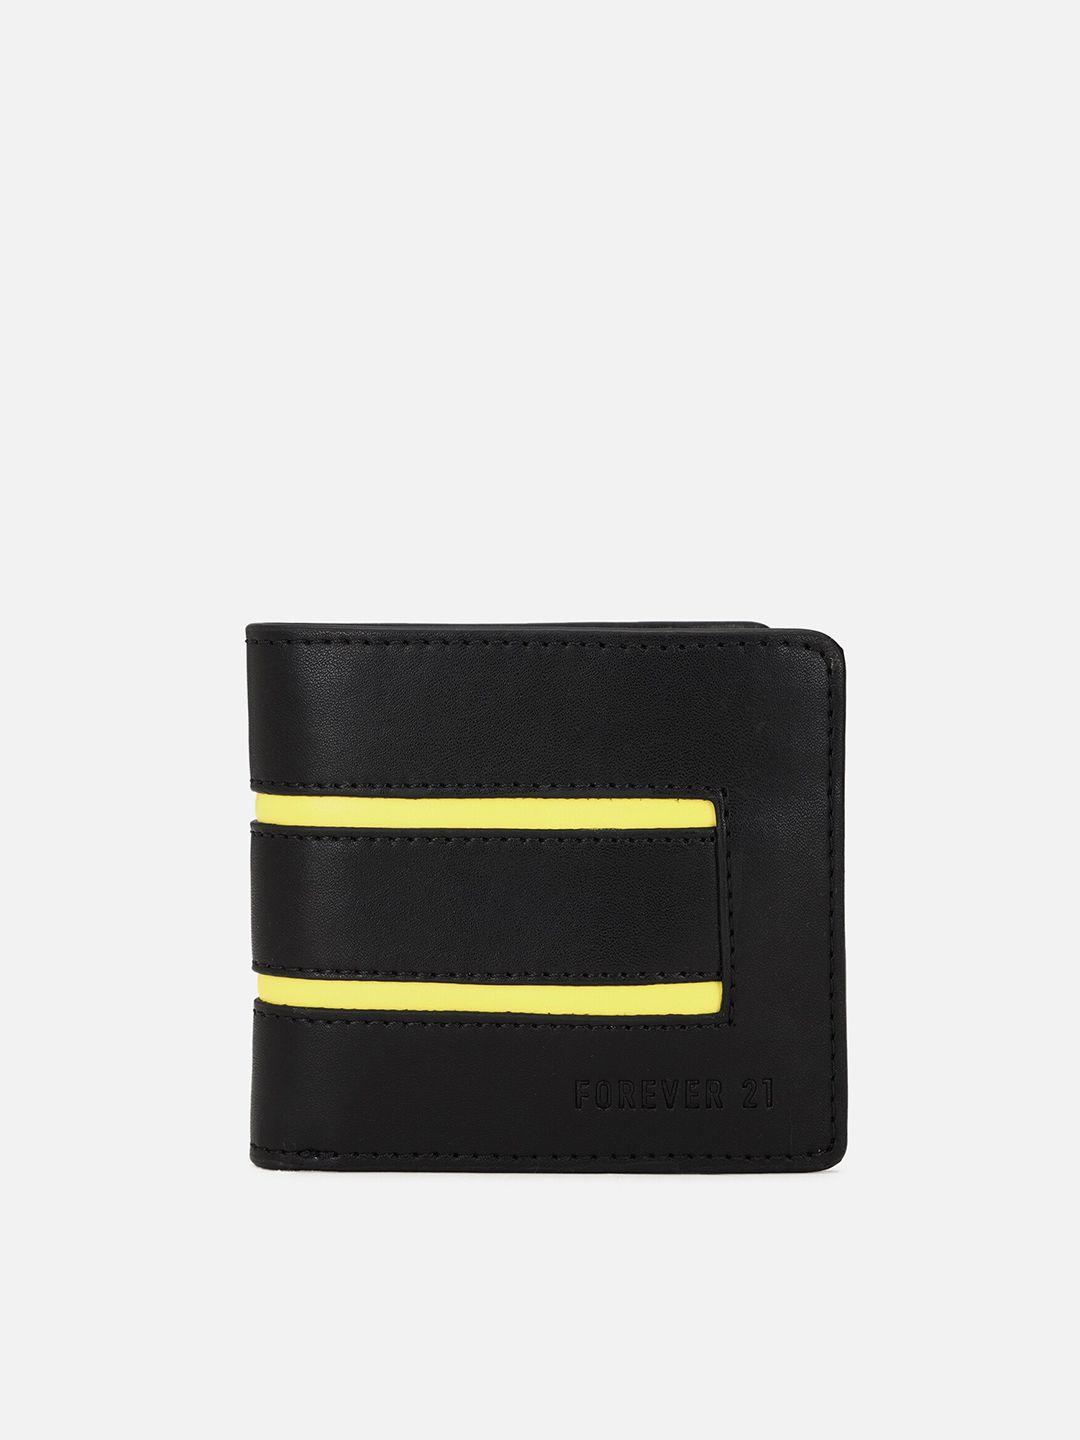 forever 21 men black & yellow striped pu two fold wallet